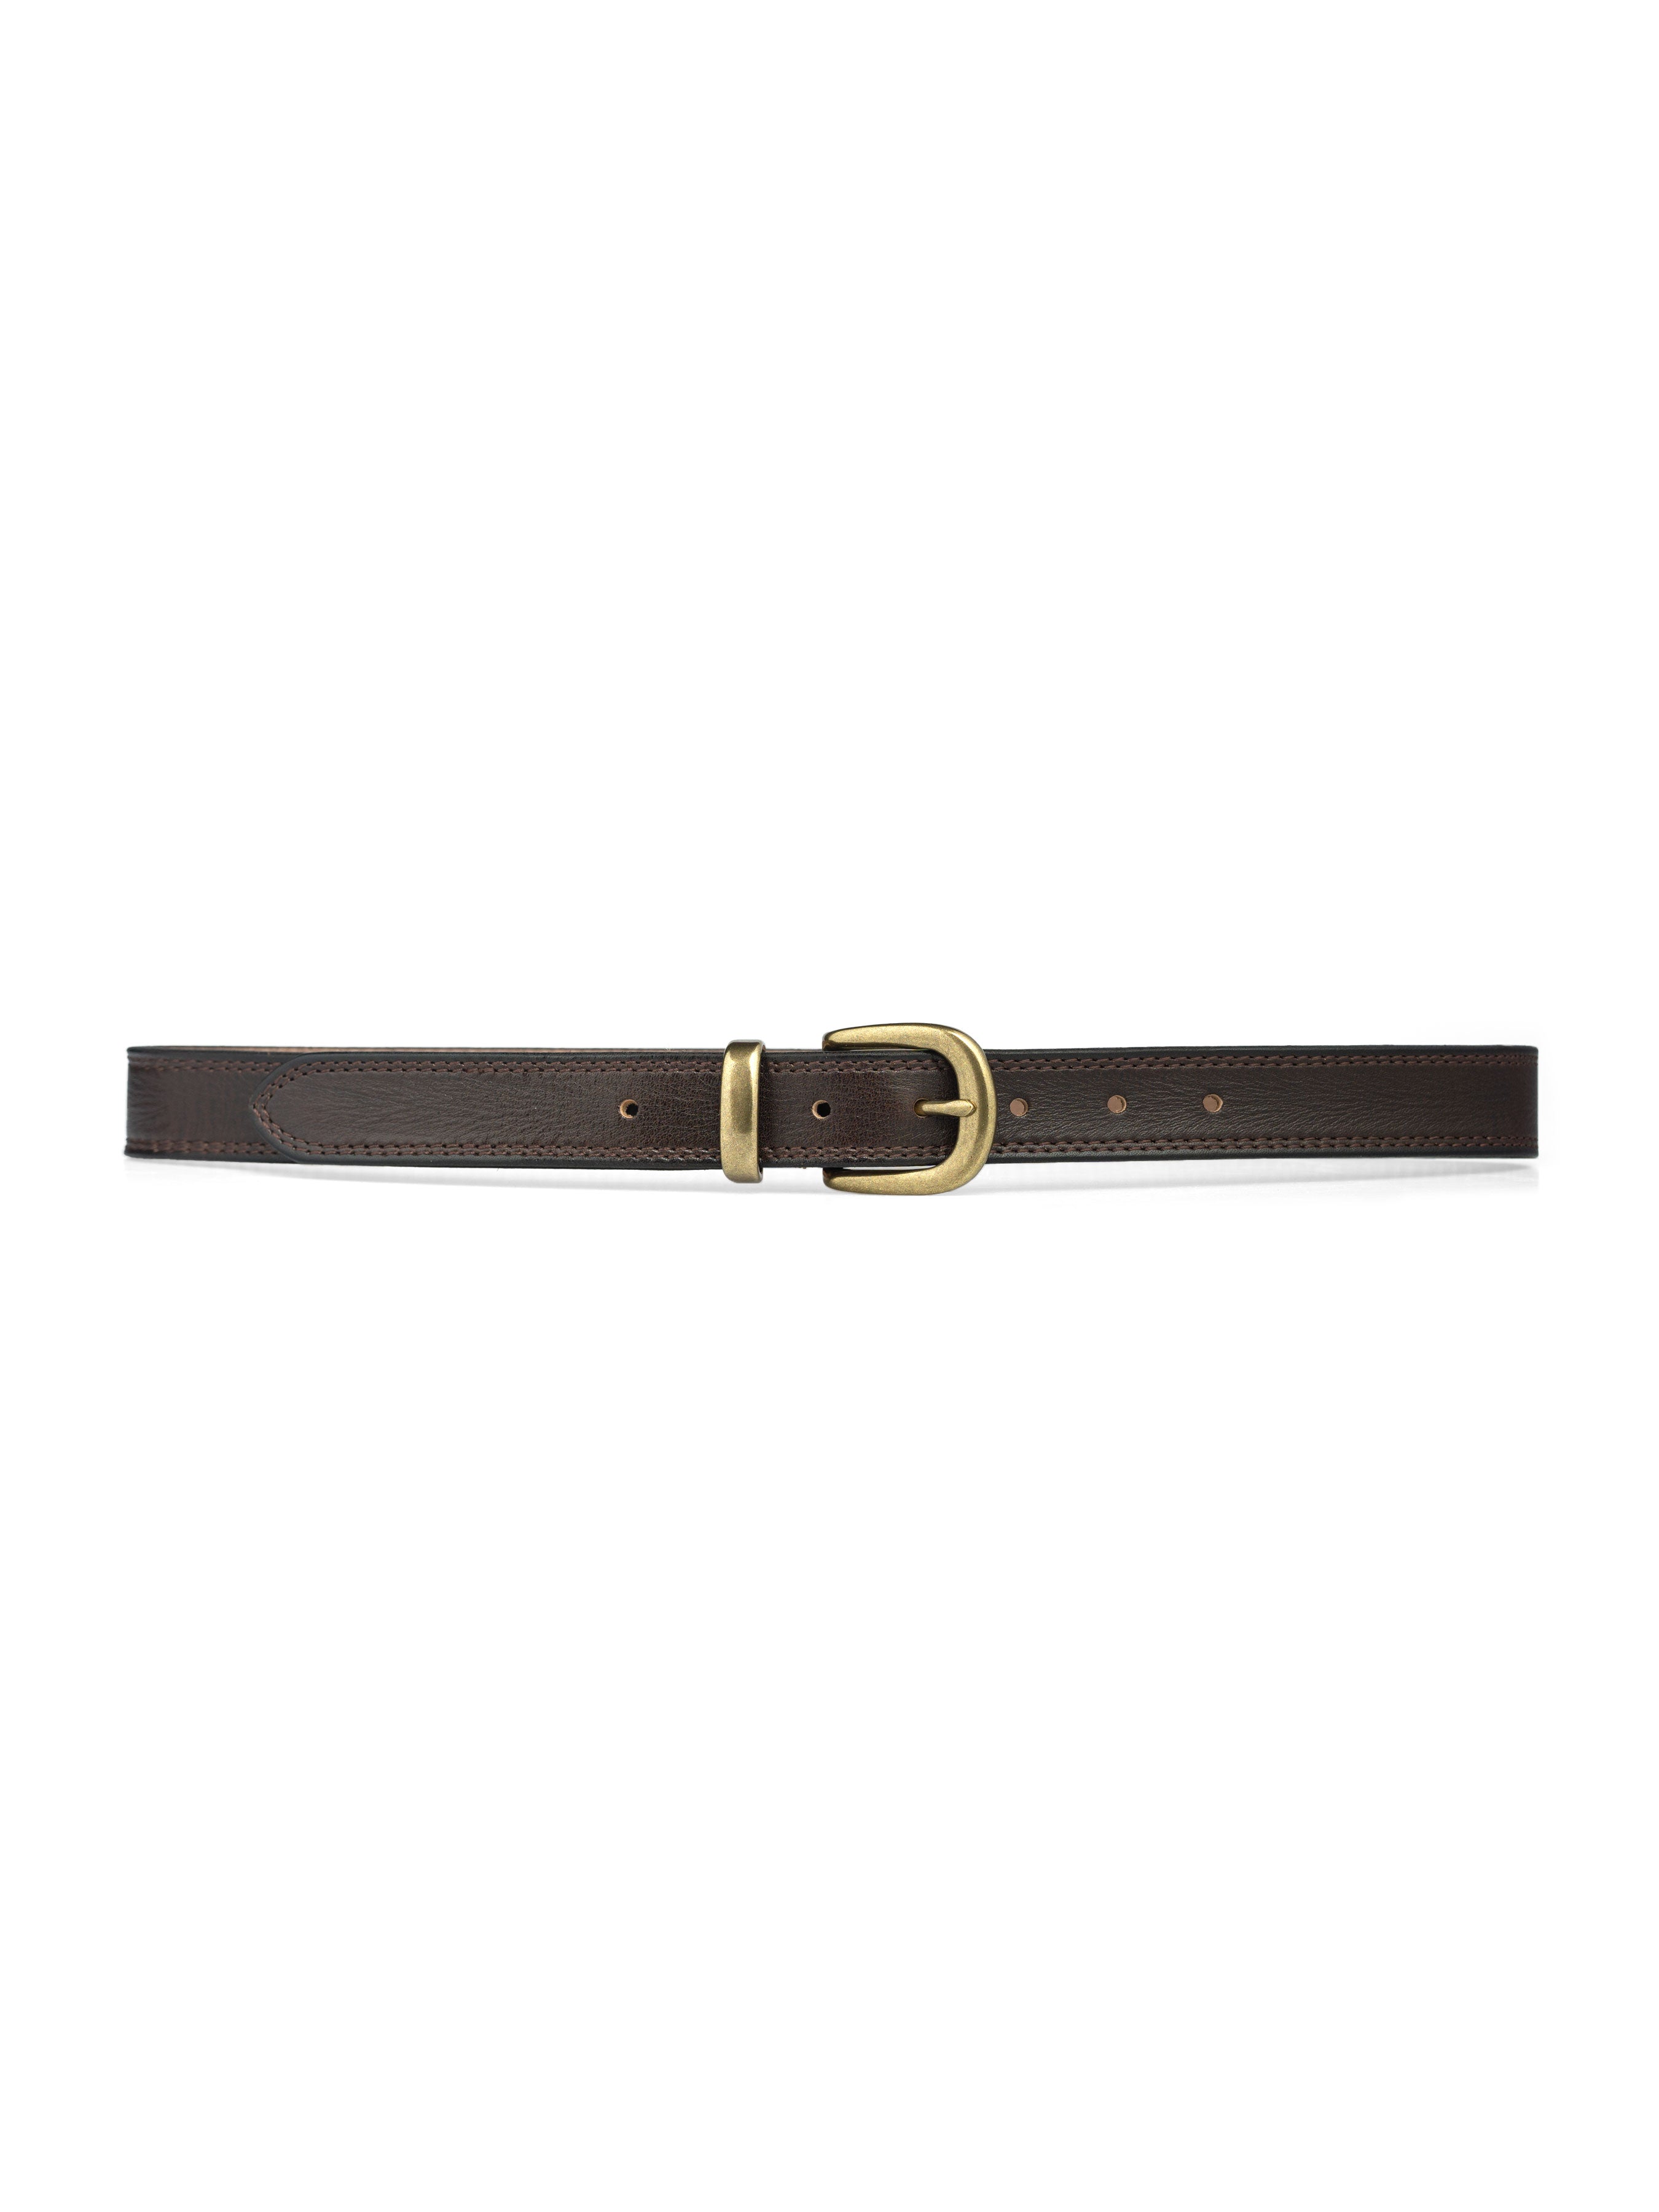 Leather Belt with Horseshoe Gold - Toned Buckle with Stitching - Zeve Shoes